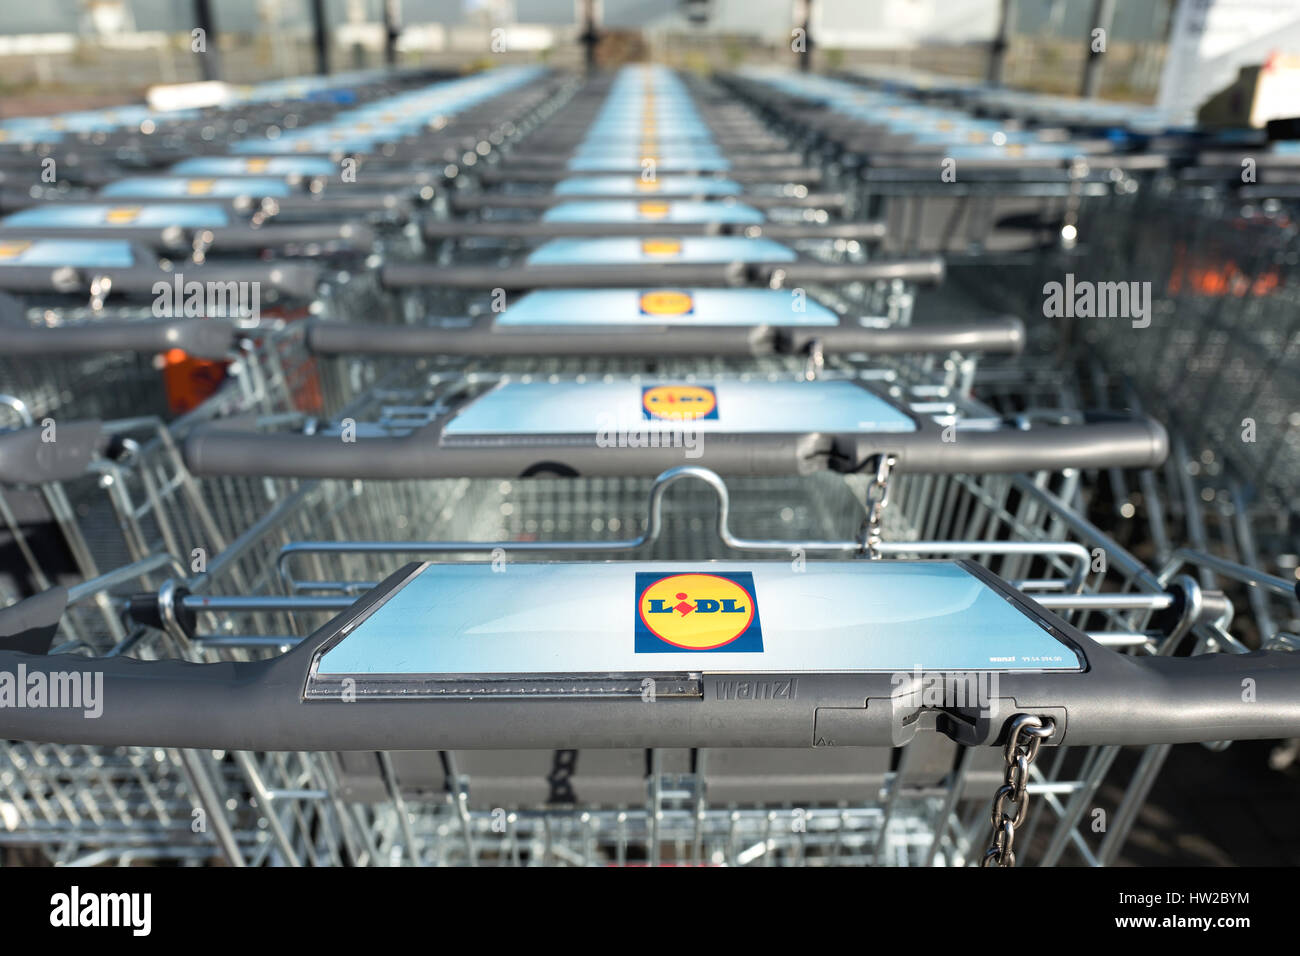 Lidl sign at shopping carts made by Wanzl. Lidl is the largest discount supermarket chain in Europe. Stock Photo